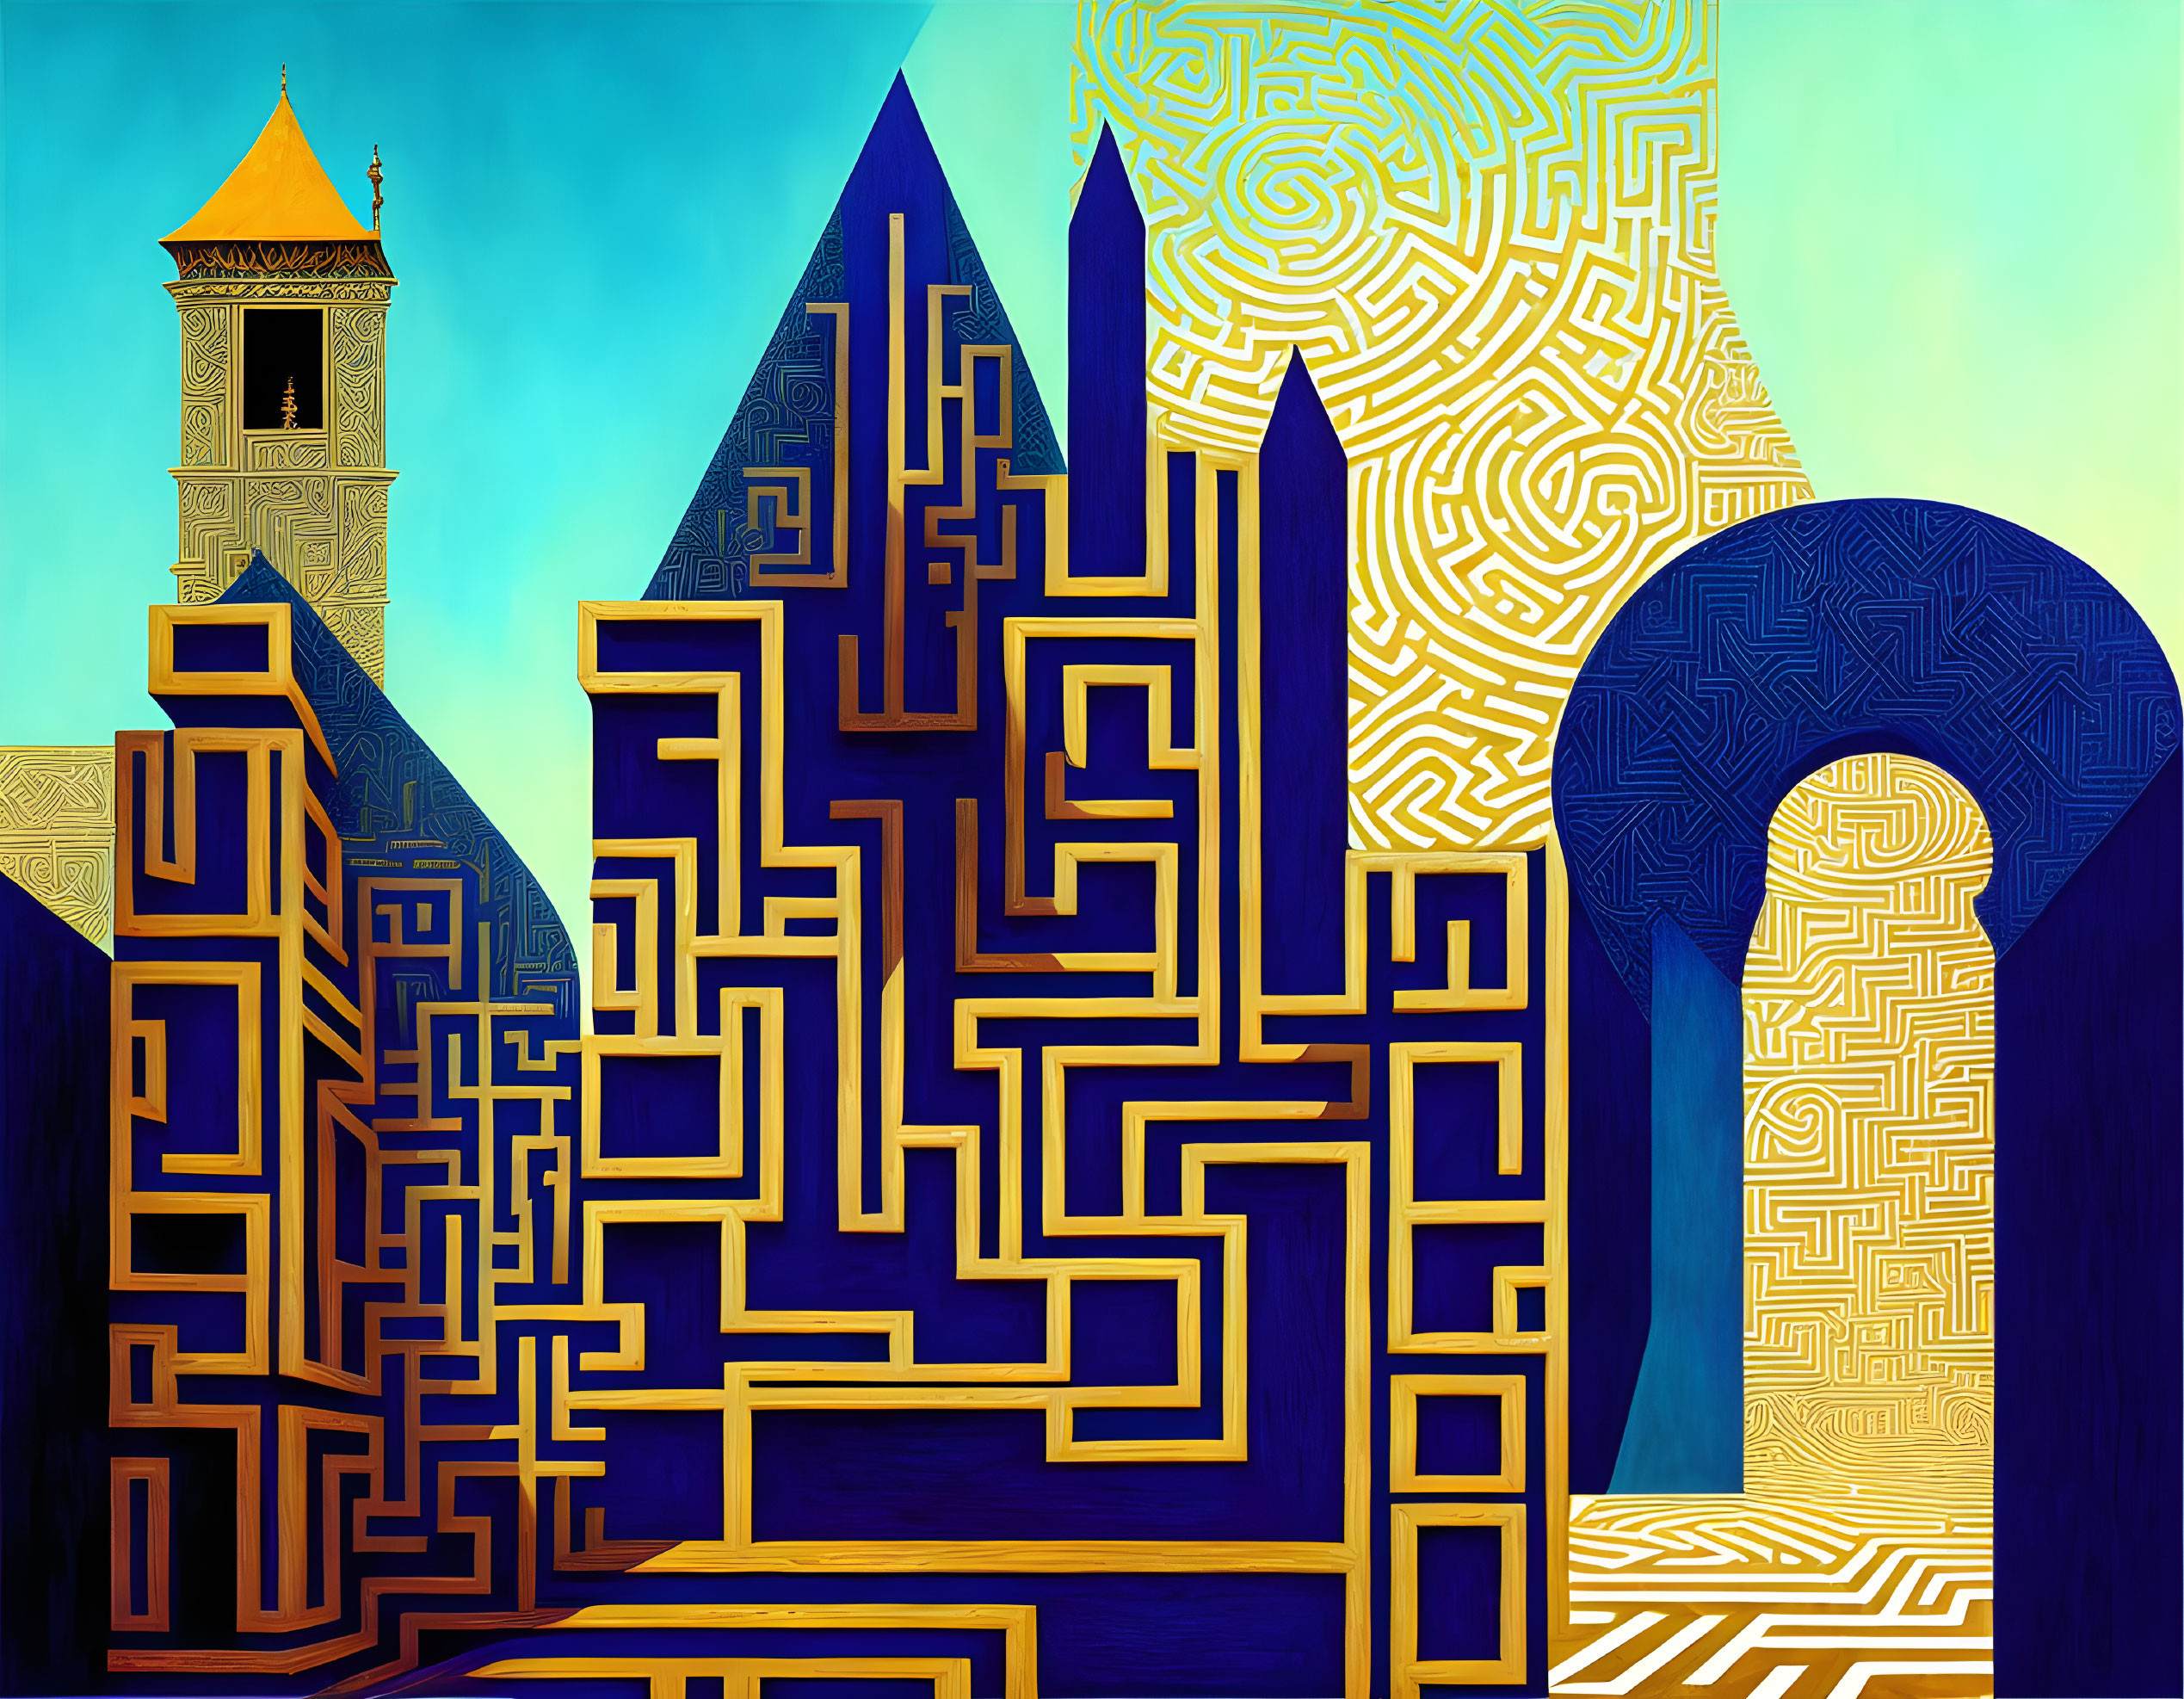 Geometric Labyrinth Art: Bell Tower, Archways in Blue, Gold & Turquoise